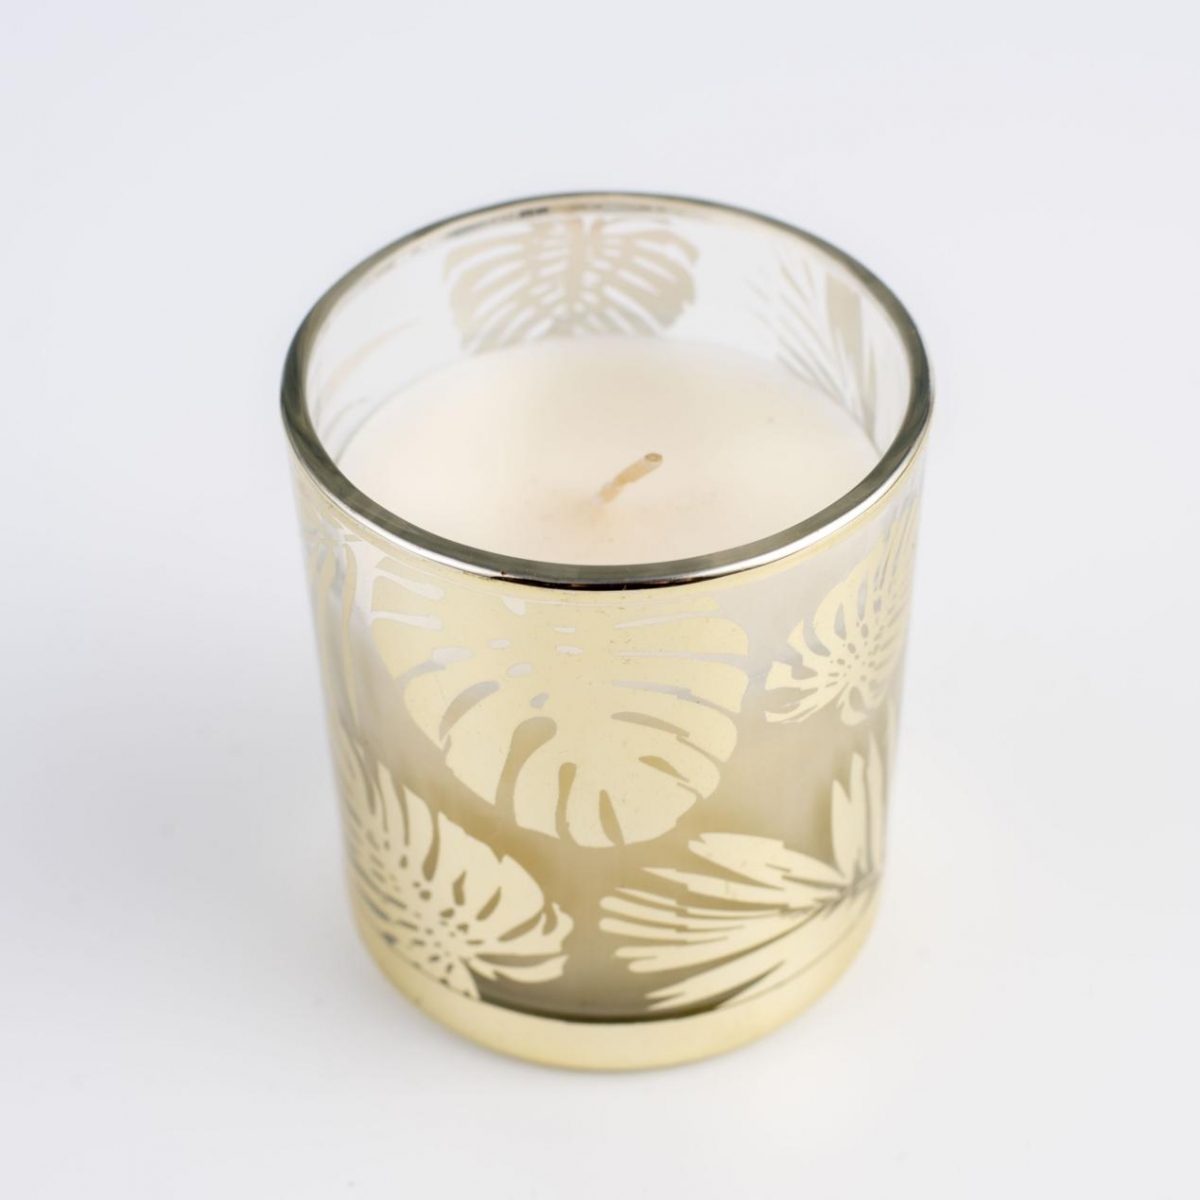 Aromaterapy Candles : Natural Forest Fragrance ,Vegan Candles ,Laser Engraved Glass ,Monstera ,China Factory ,Cheap Price-HOWCANDLE-Candles,Scented Candles,Aromatherapy Candles,Soy Candles,Vegan Candles,Jar Candles,Pillar Candles,Candle Gift Sets,Essential Oils,Reed Diffuser,Candle Holder,